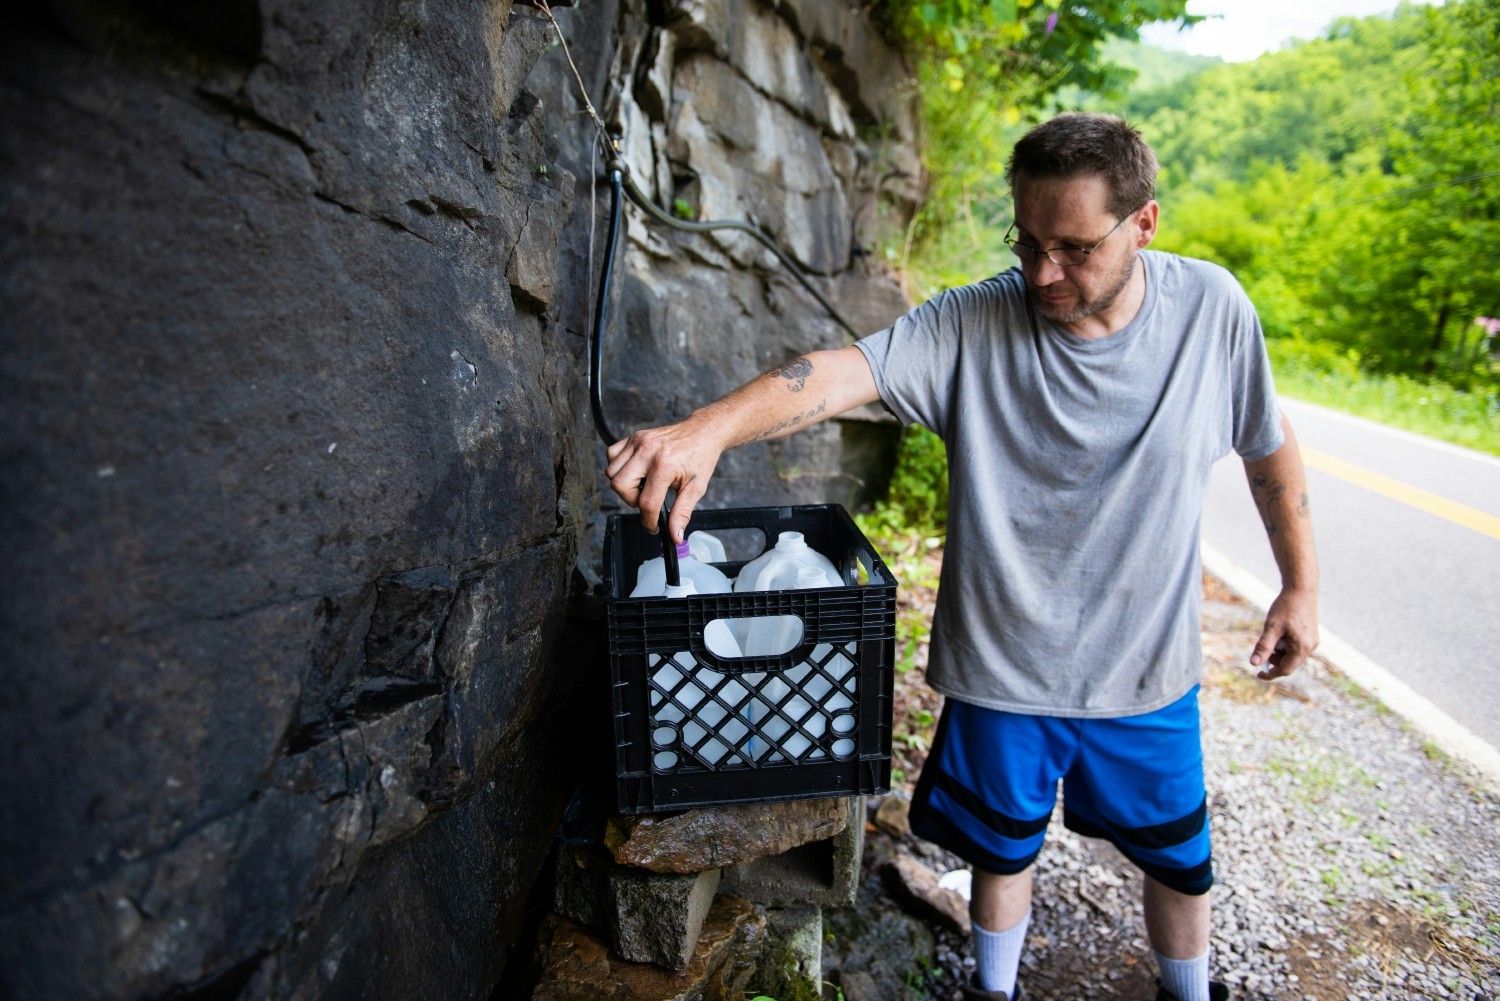 MANY AMERICANS ARE STILL FORCED TO GO TO GREAT LENGTHS JUST TO GET ENOUGH CLEAN WATER EVERY DAY TO SURVIVE.